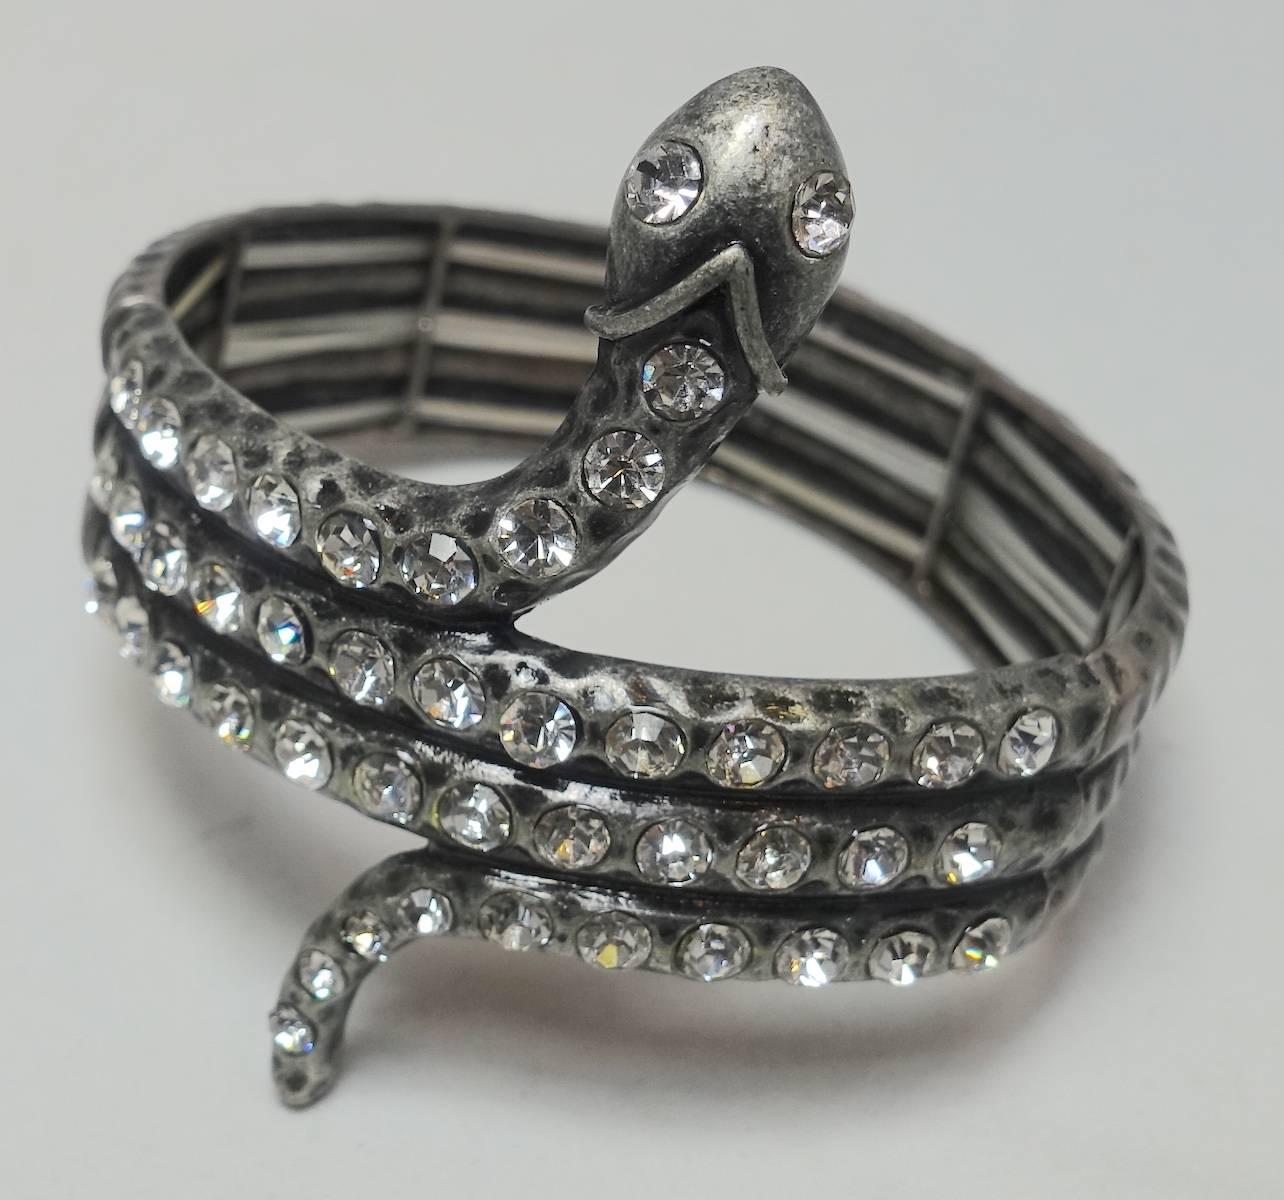 This is the second bracelet. This dramatic bracelet features a snake-serpent design with clear crystals in a heavily carved silver-tone setting.  In excellent condition, this bracelet measures 7-1/4” around the inside x 3/4” around the wrist.